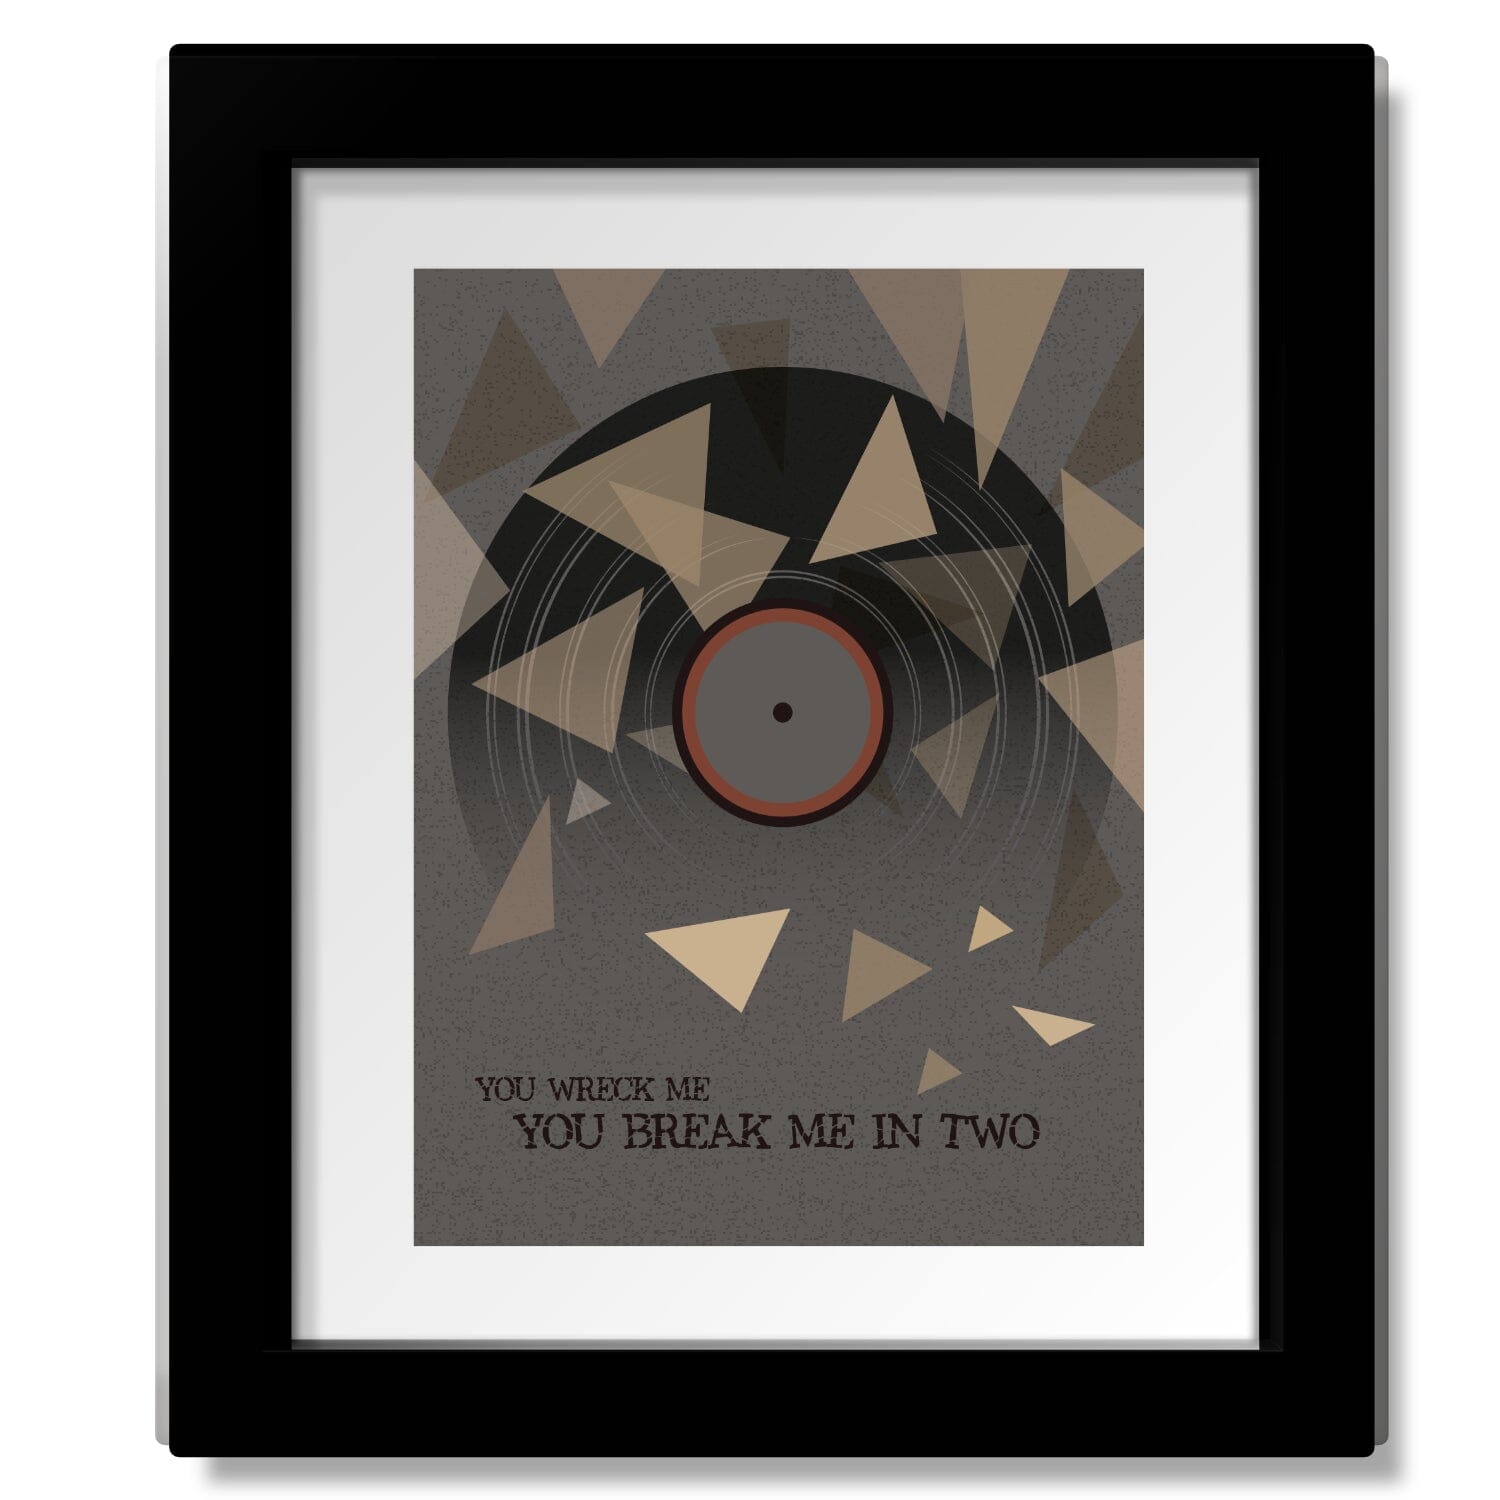 You Wreck me by Tom Petty - Song Lyrics Art Poster Print Song Lyrics Art Song Lyrics Art 8x10 Matted and Framed Print 